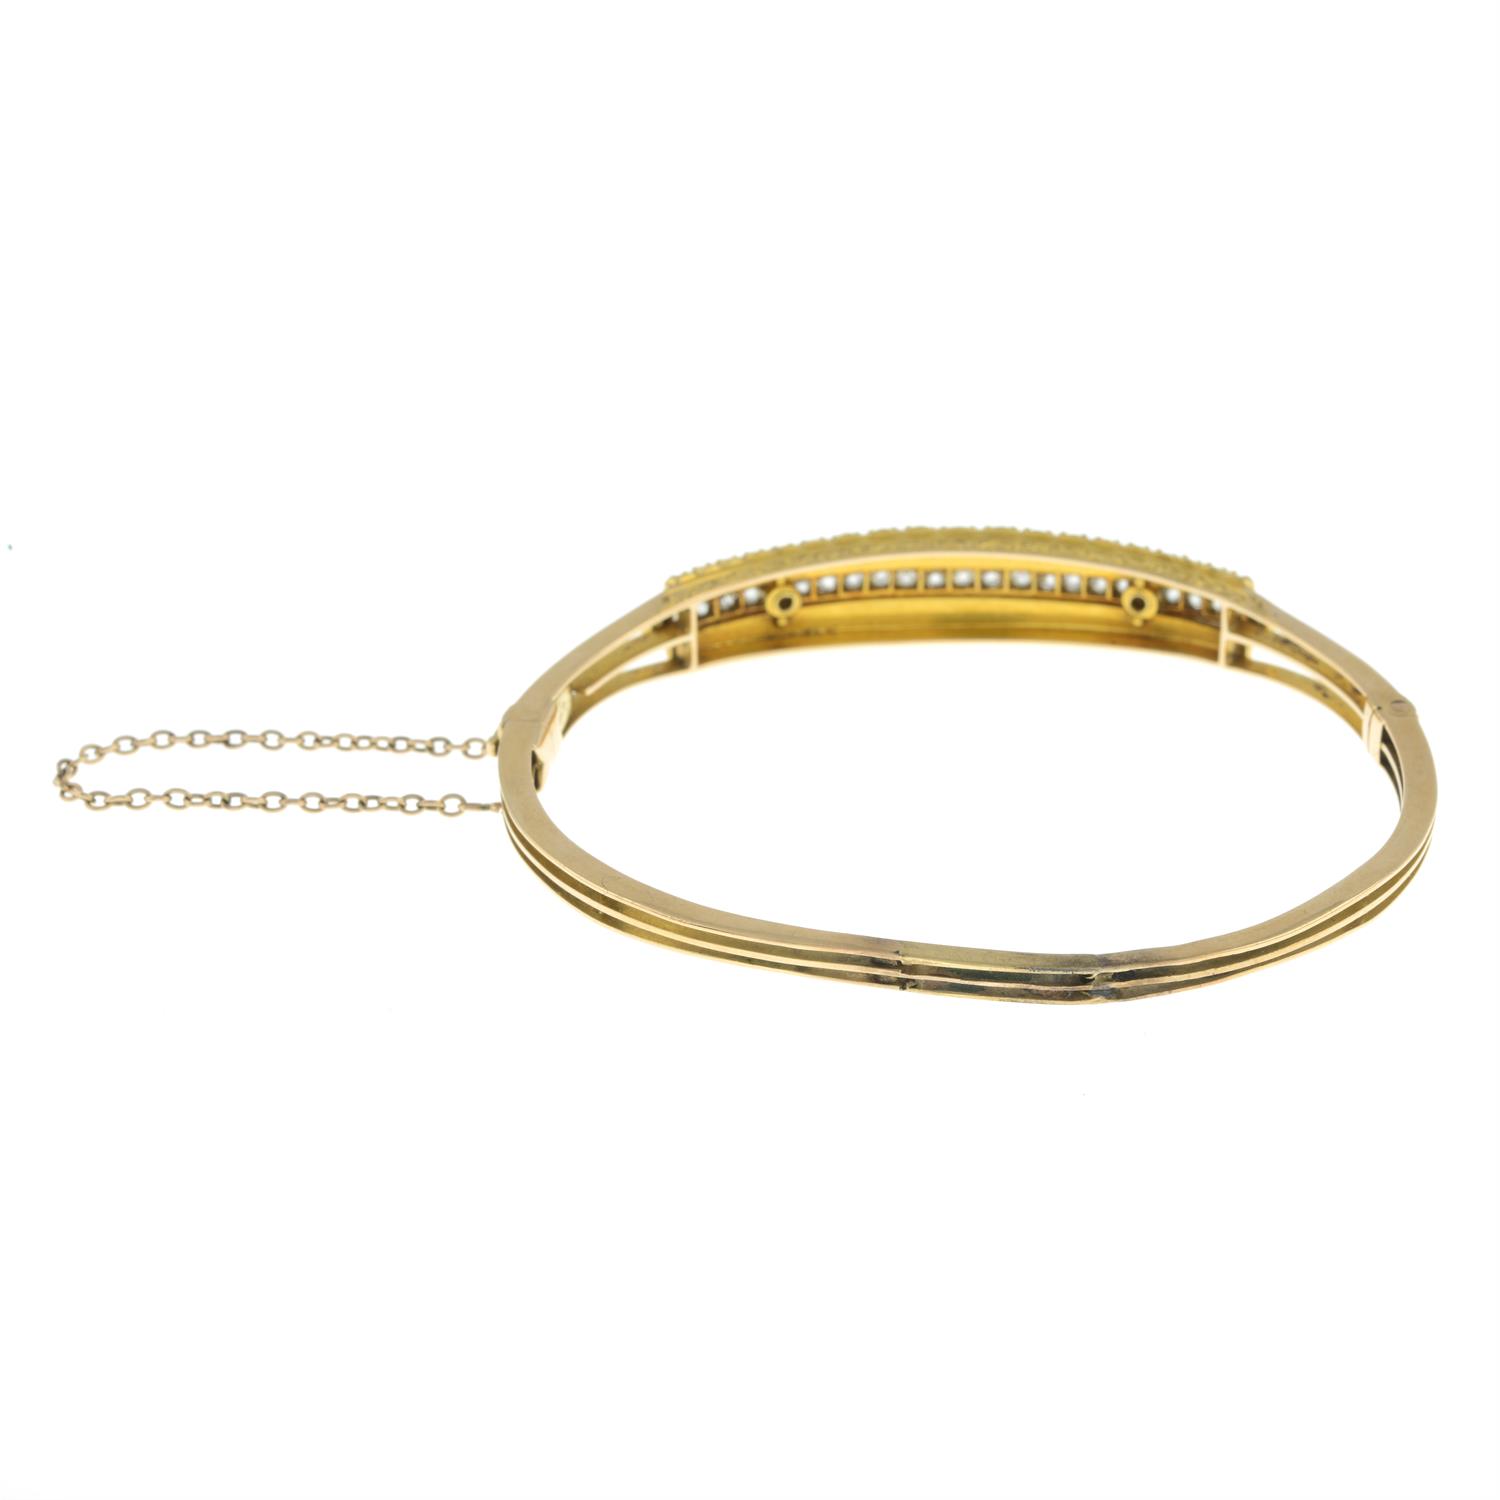 Victorian 15ct gold diamond and split pearl bangle - Image 3 of 4